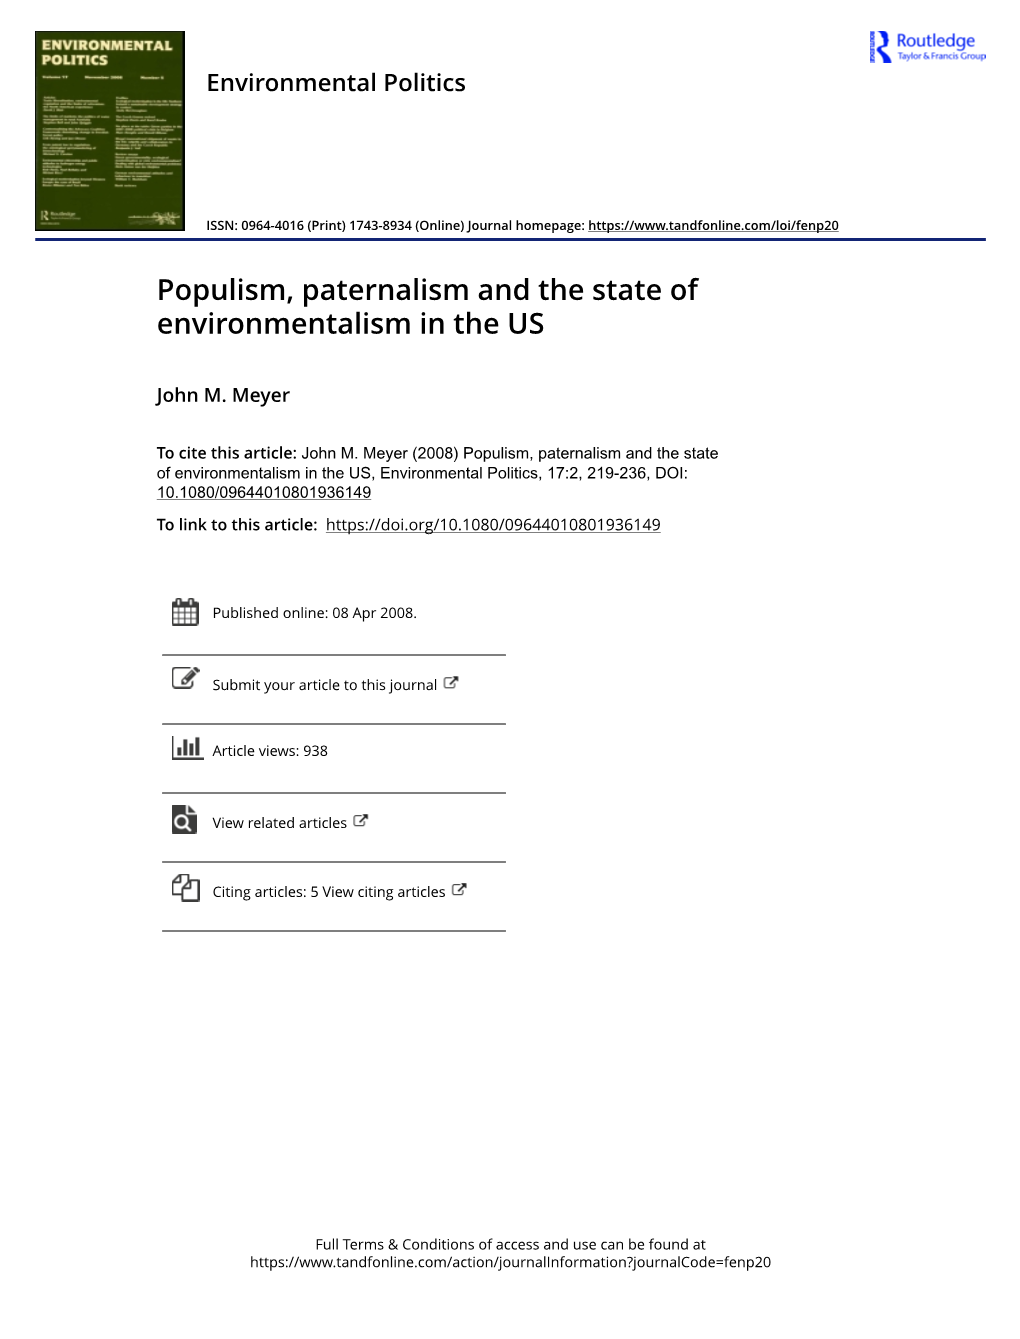 Populism, Paternalism and the State of Environmentalism in the US